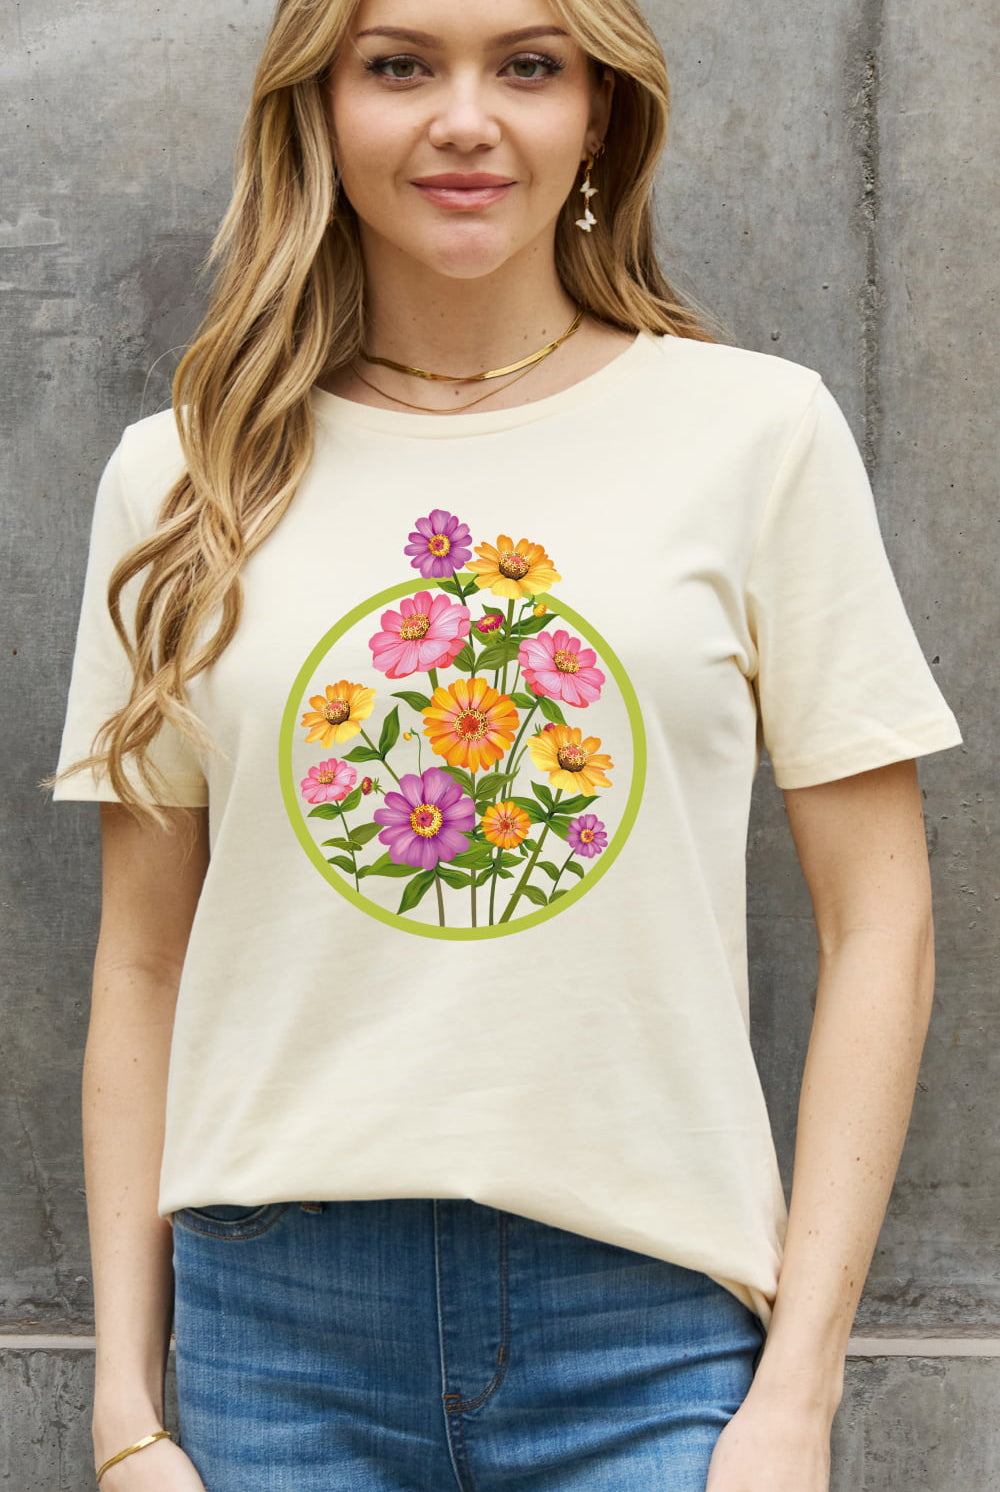 Rosy Brown Simply Love Full Size Flower Graphic Cotton Tee Tops